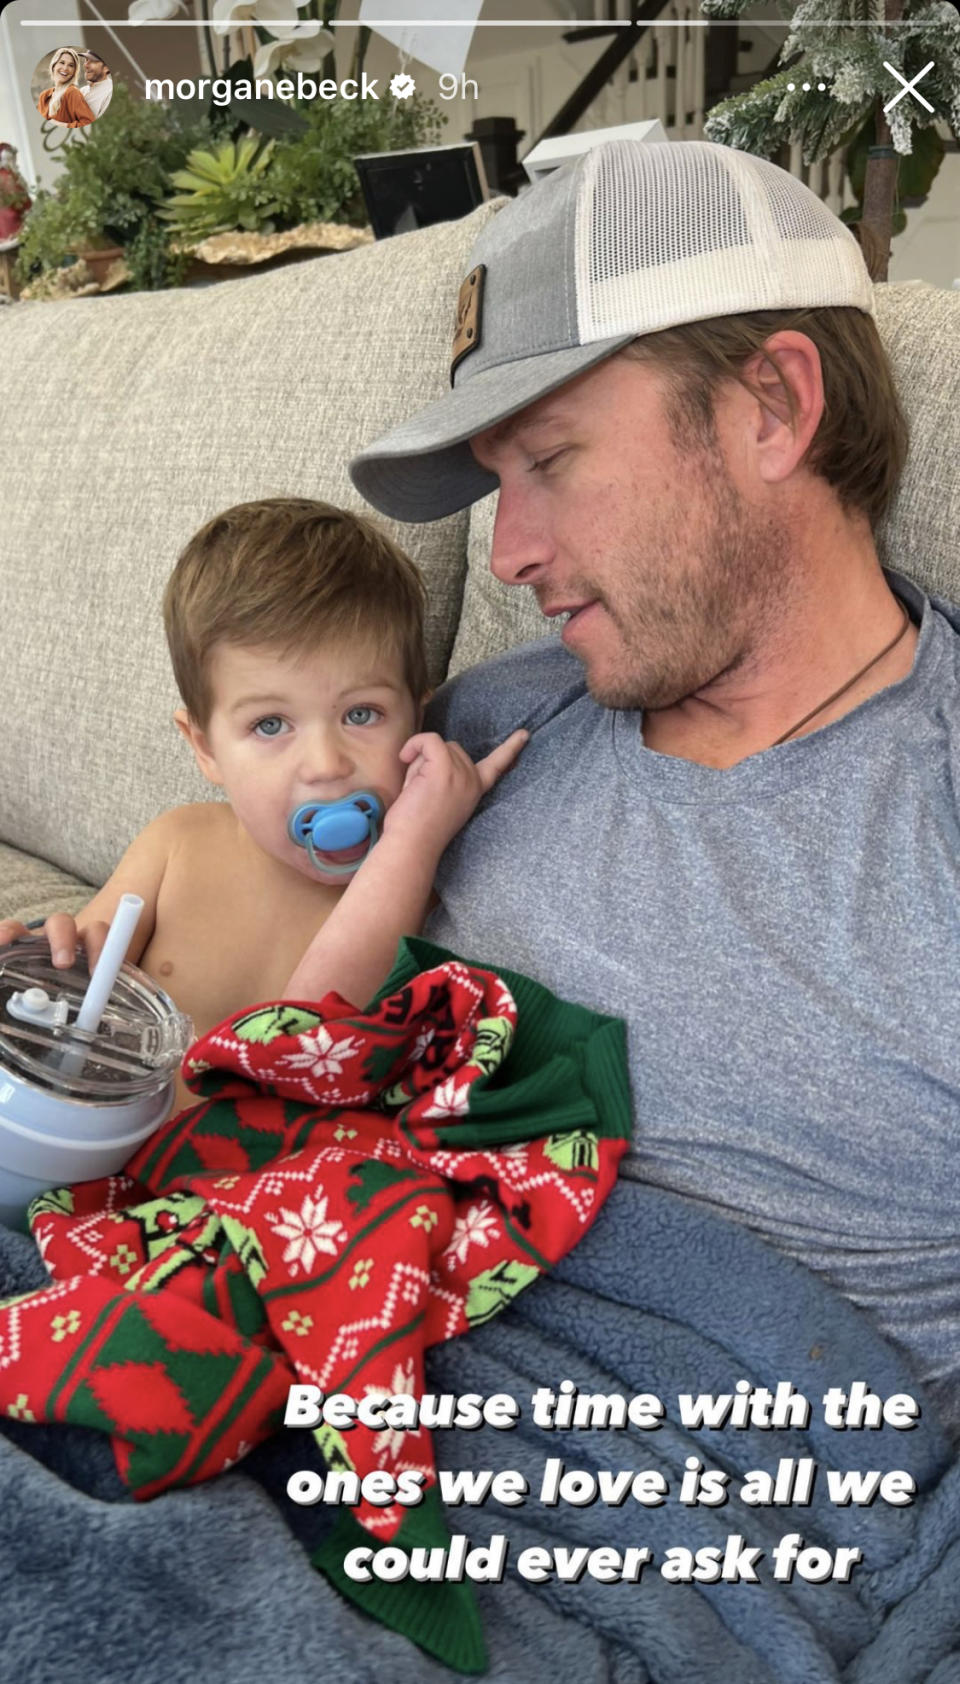 Morgan shared a sweet photo of her husband with their son. (Instagram story/Morgan Miller)